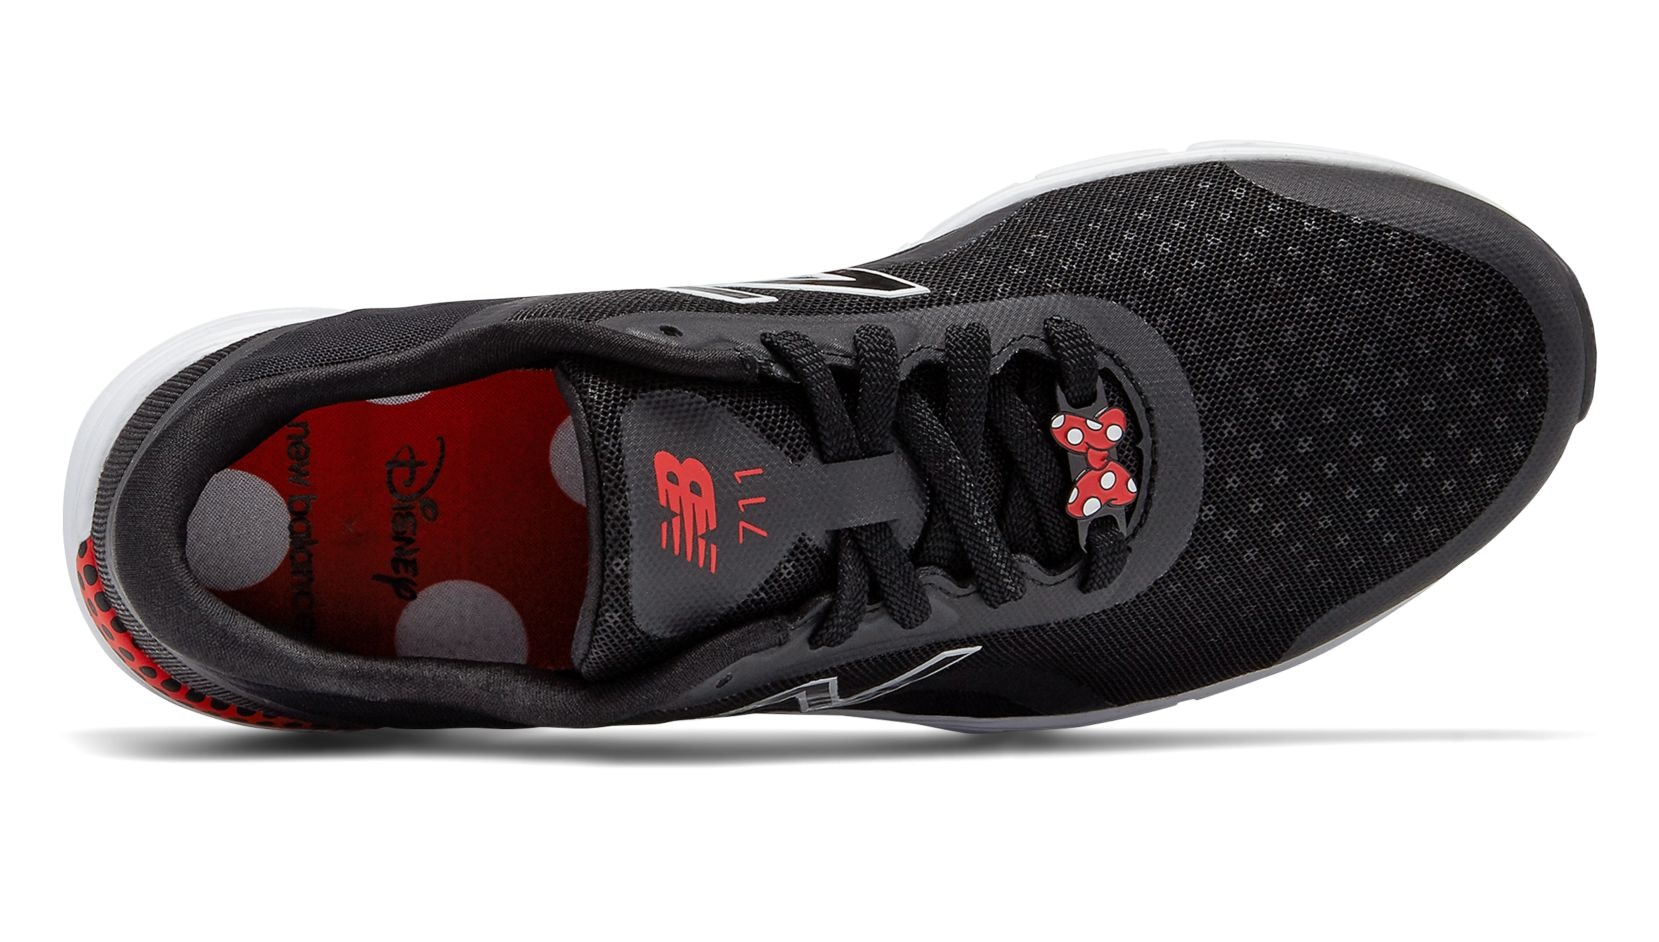 Minnie Mouse x New Balance Sneakers 